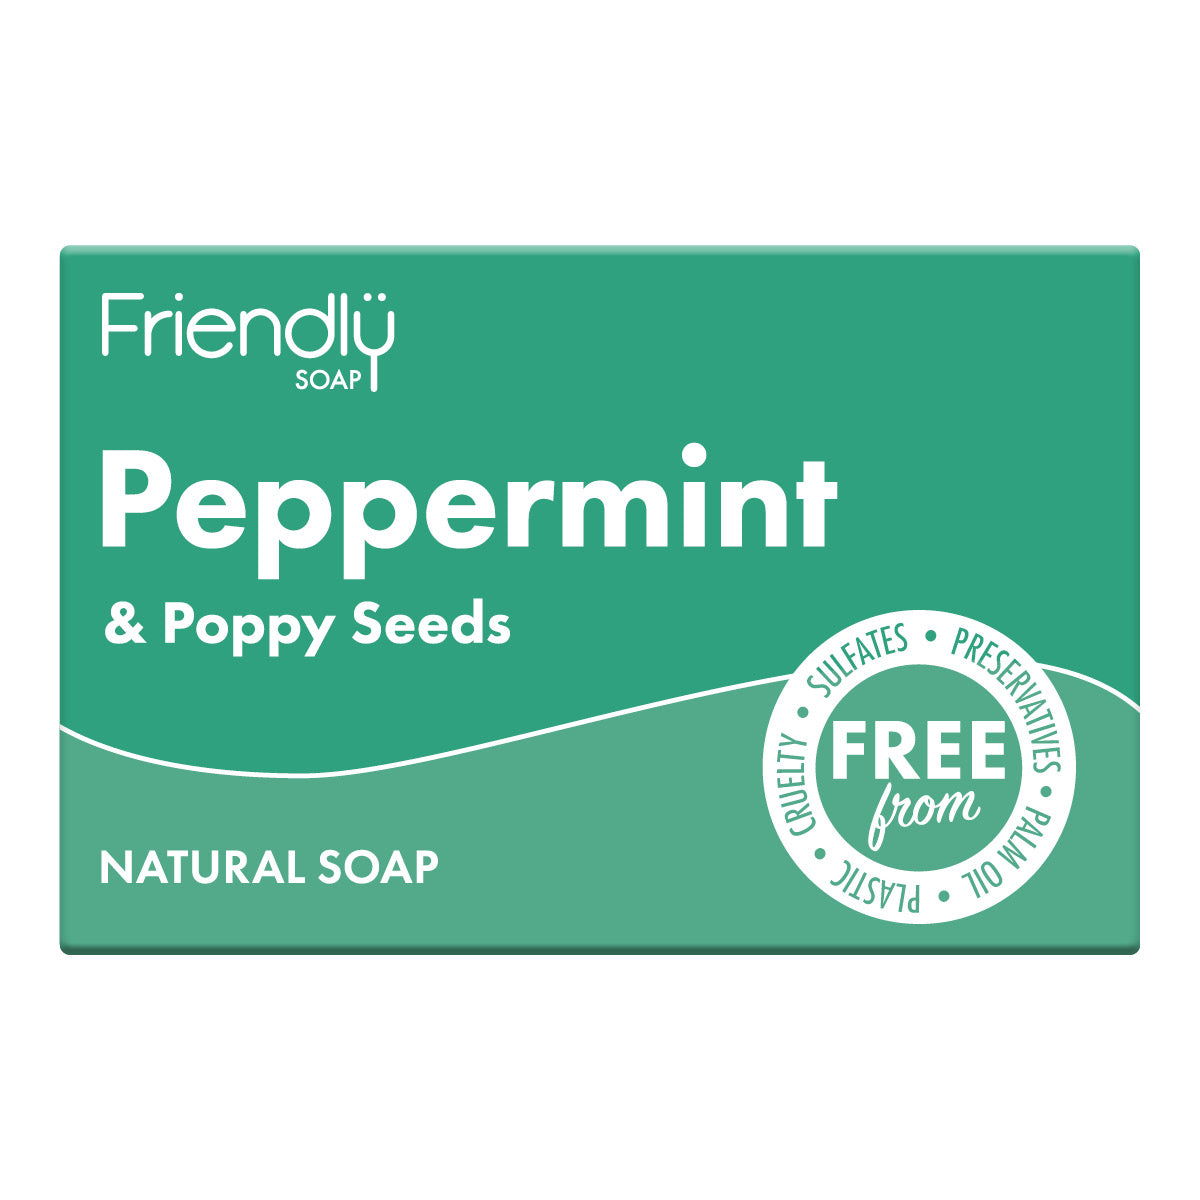 12 Pack - Natural Soap - Peppermint & Poppy Seeds